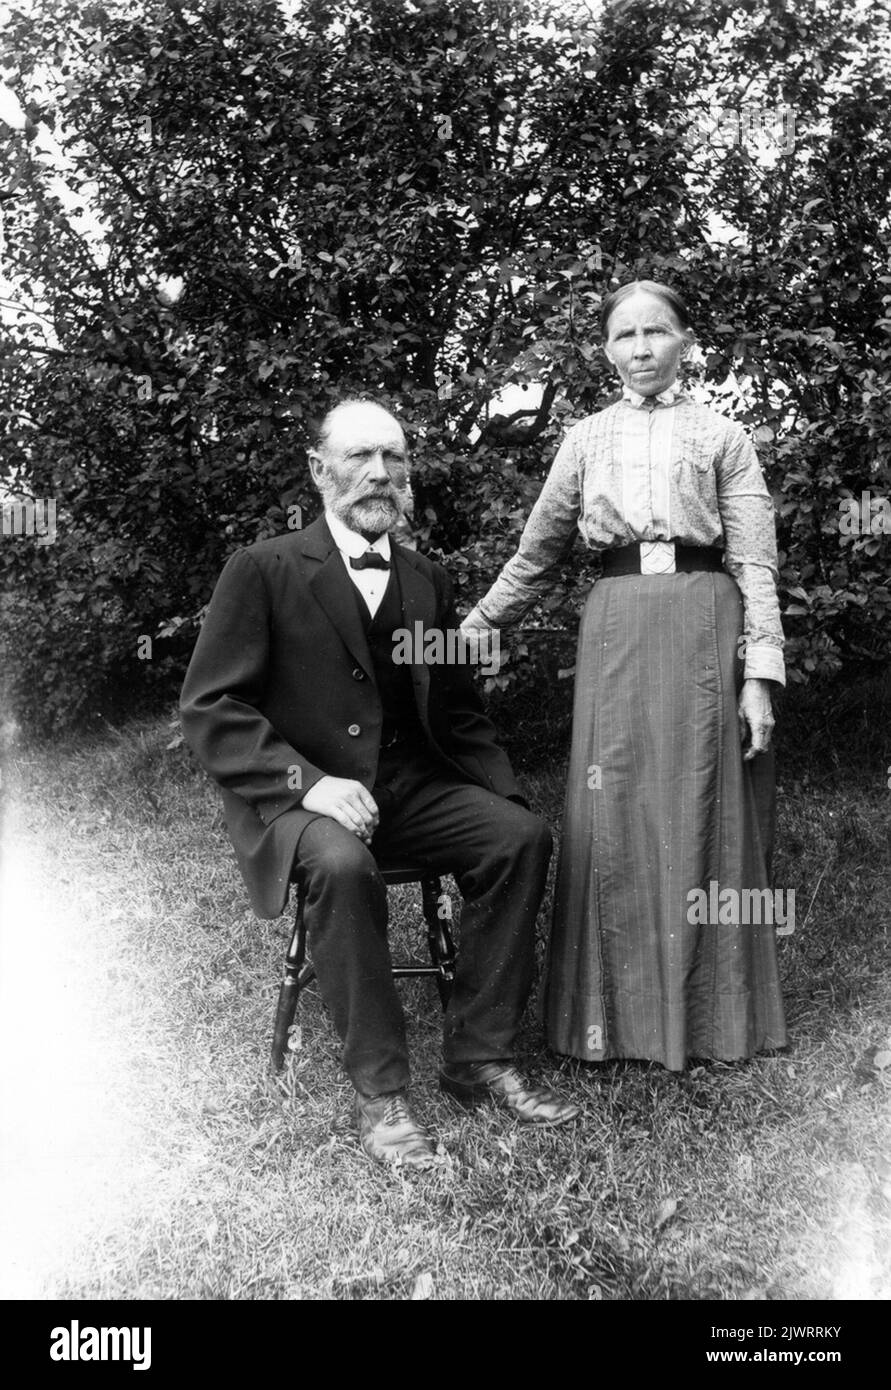 Brita the Black and White Stock Photos & Images - Page 2 - Alamy